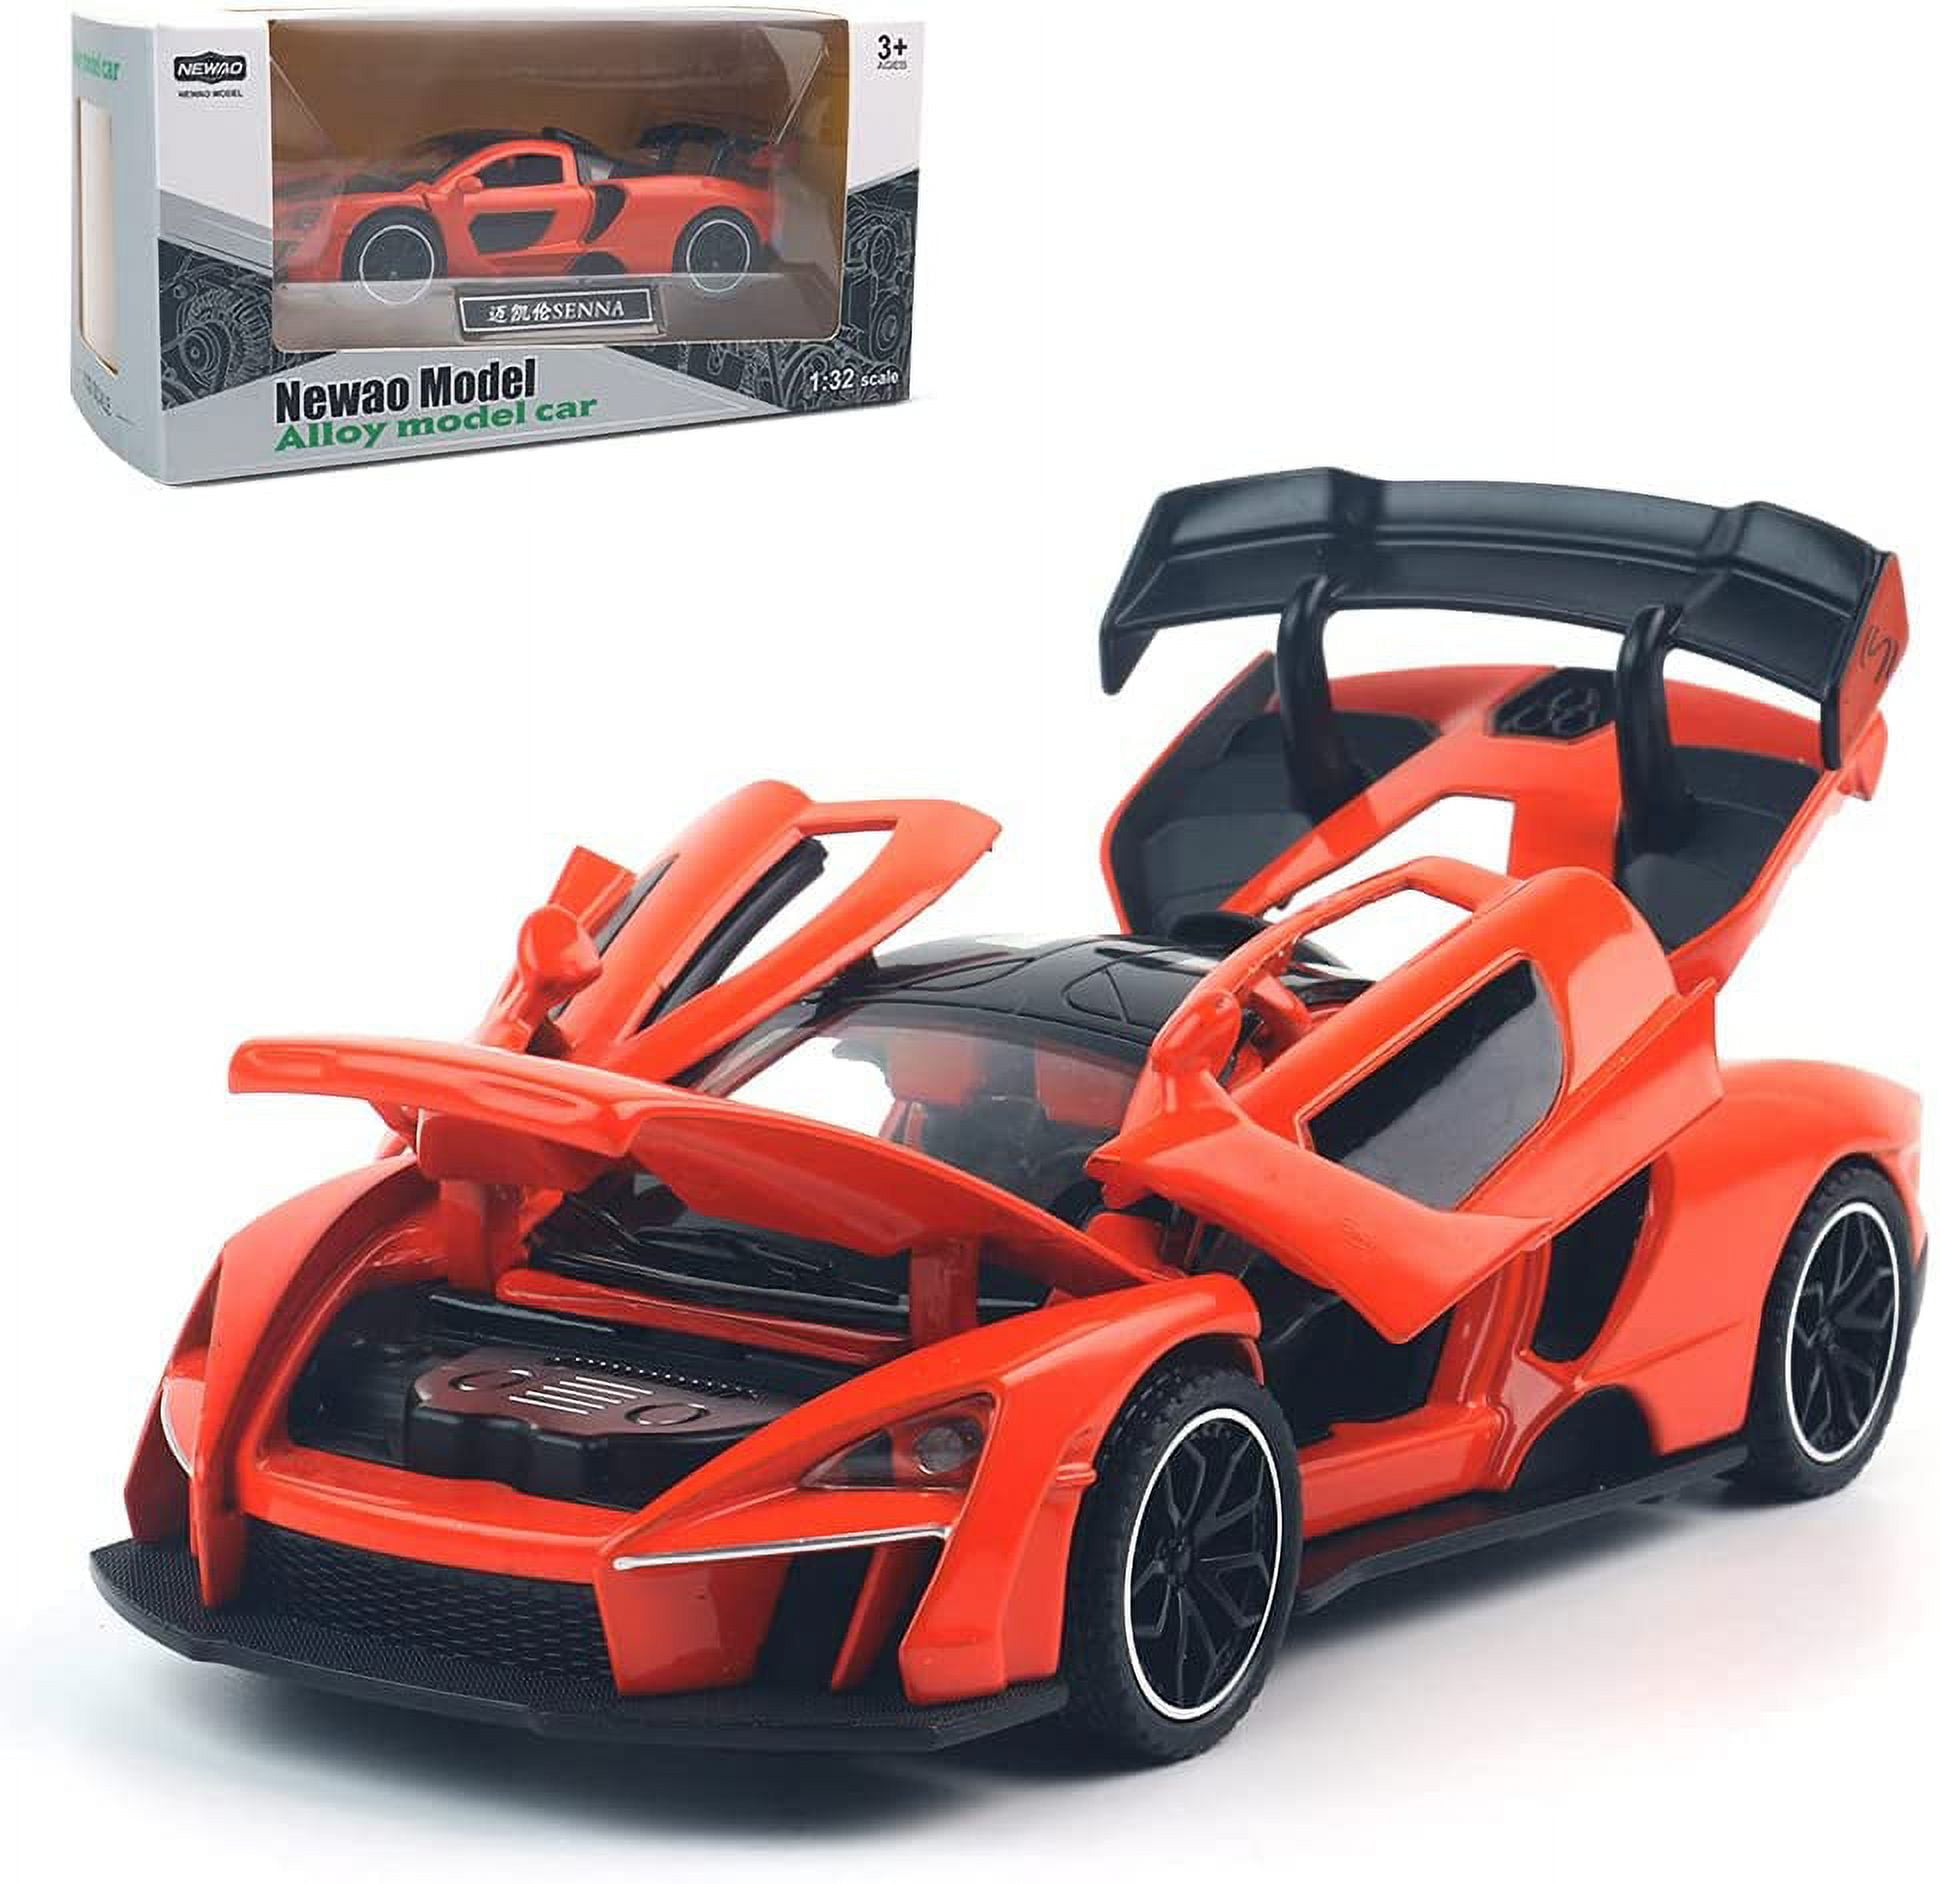 1:24 Scale Fast And Furious Die-cast Orange Super Car Model Toy Miniature  Metal Die-cast Collectible Car Model Children Toy Gift